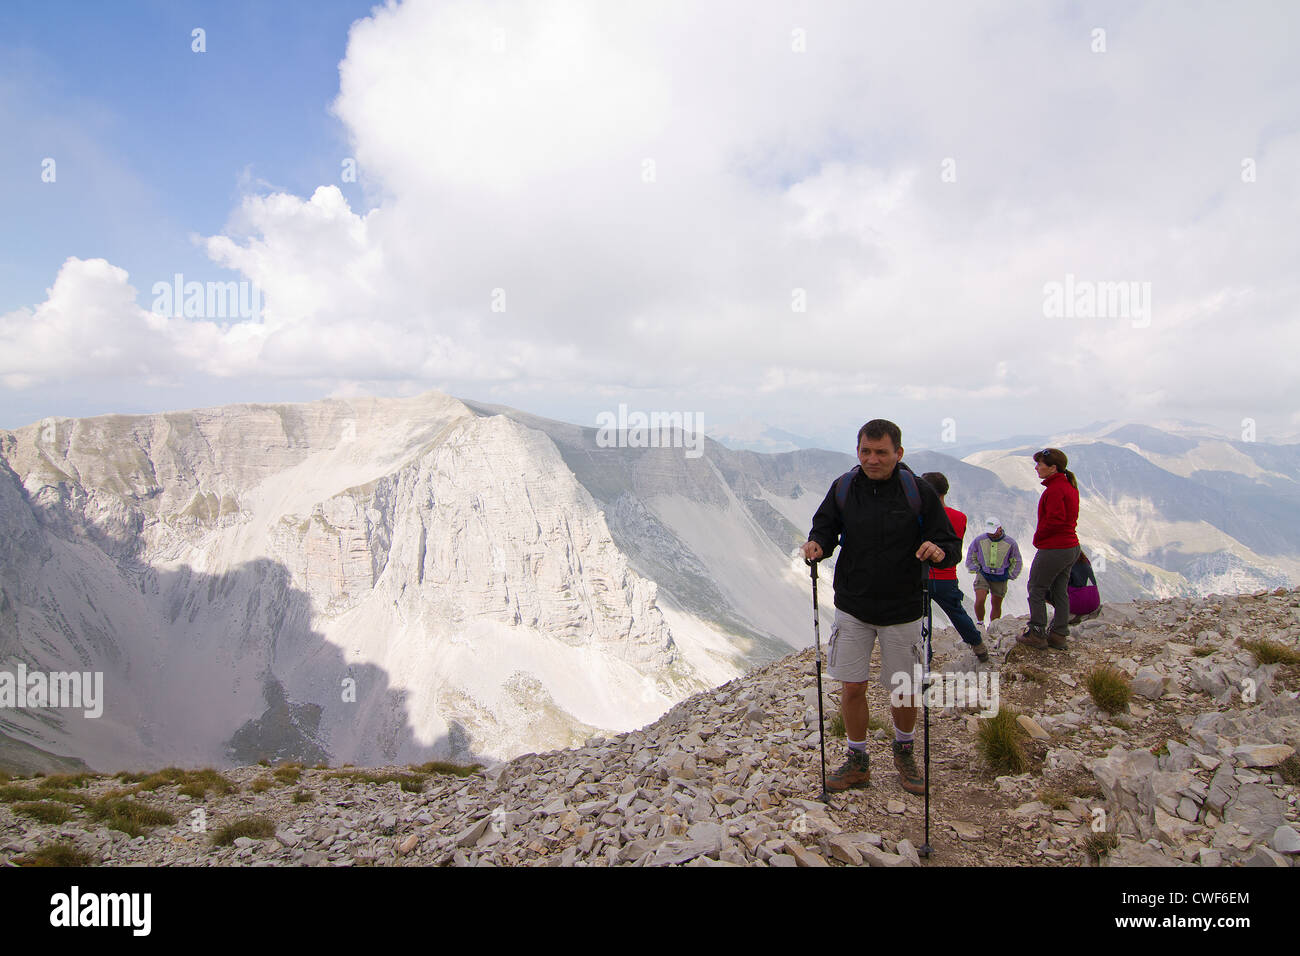 Hikers at the summit of Monte Vettore at an elevation of 2,478m (8,130ft) in the Apennines Italy Stock Photo